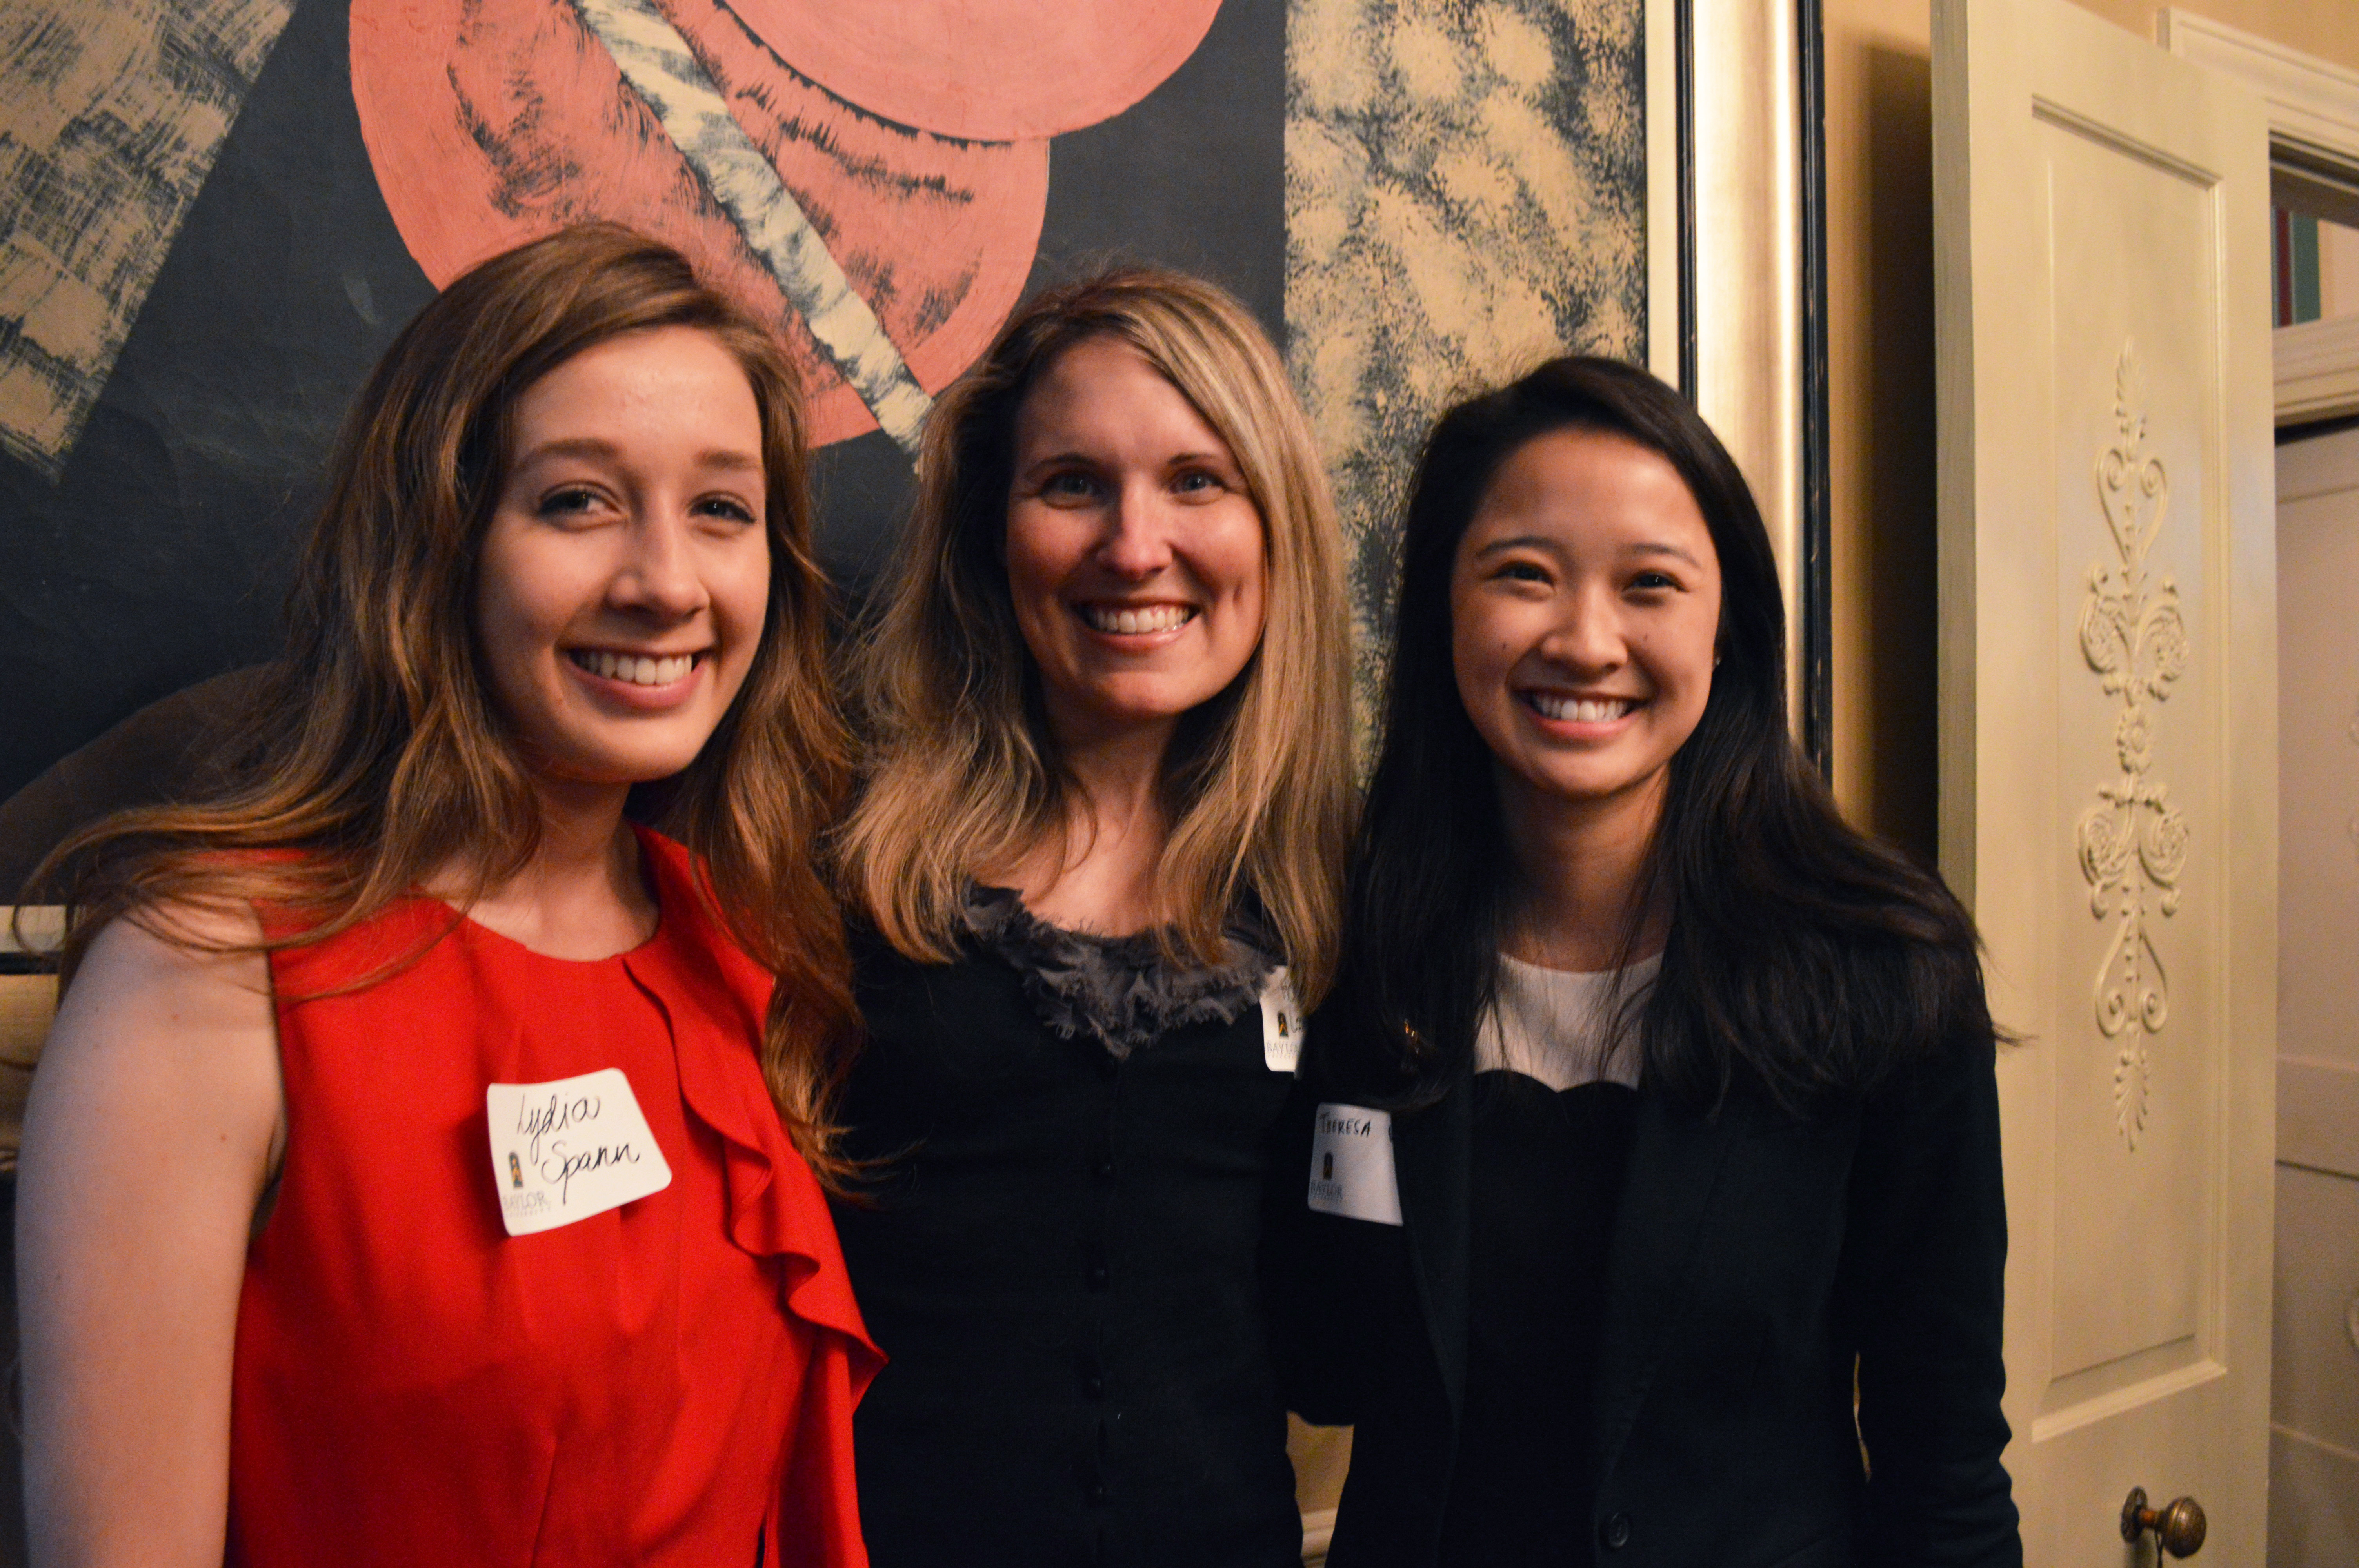 Students had an opportunity to meet Baylor alumni at a special reception in Washington, D.C. L to R: Lydia Spann, junior public relations major, Hope Loomis, development officer at the Baylor University Honors College, and Theresa Vu, junior biochemistry major.